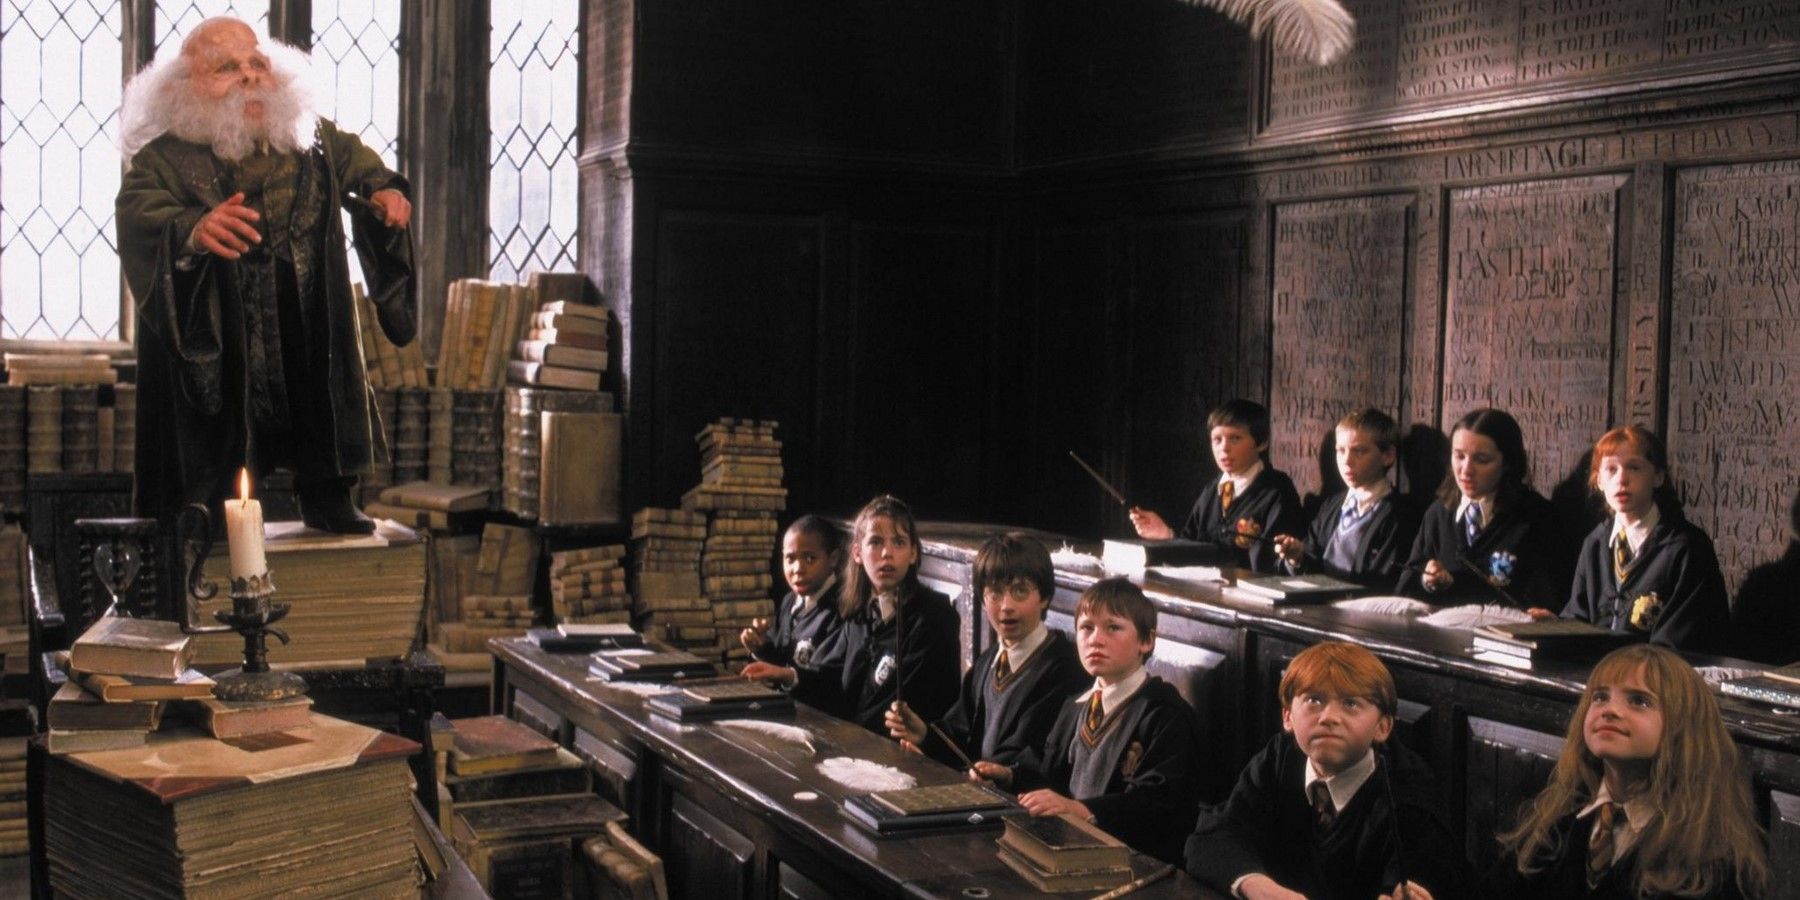 Professor Flitwick standing before his class in the original Harry Potter movie.